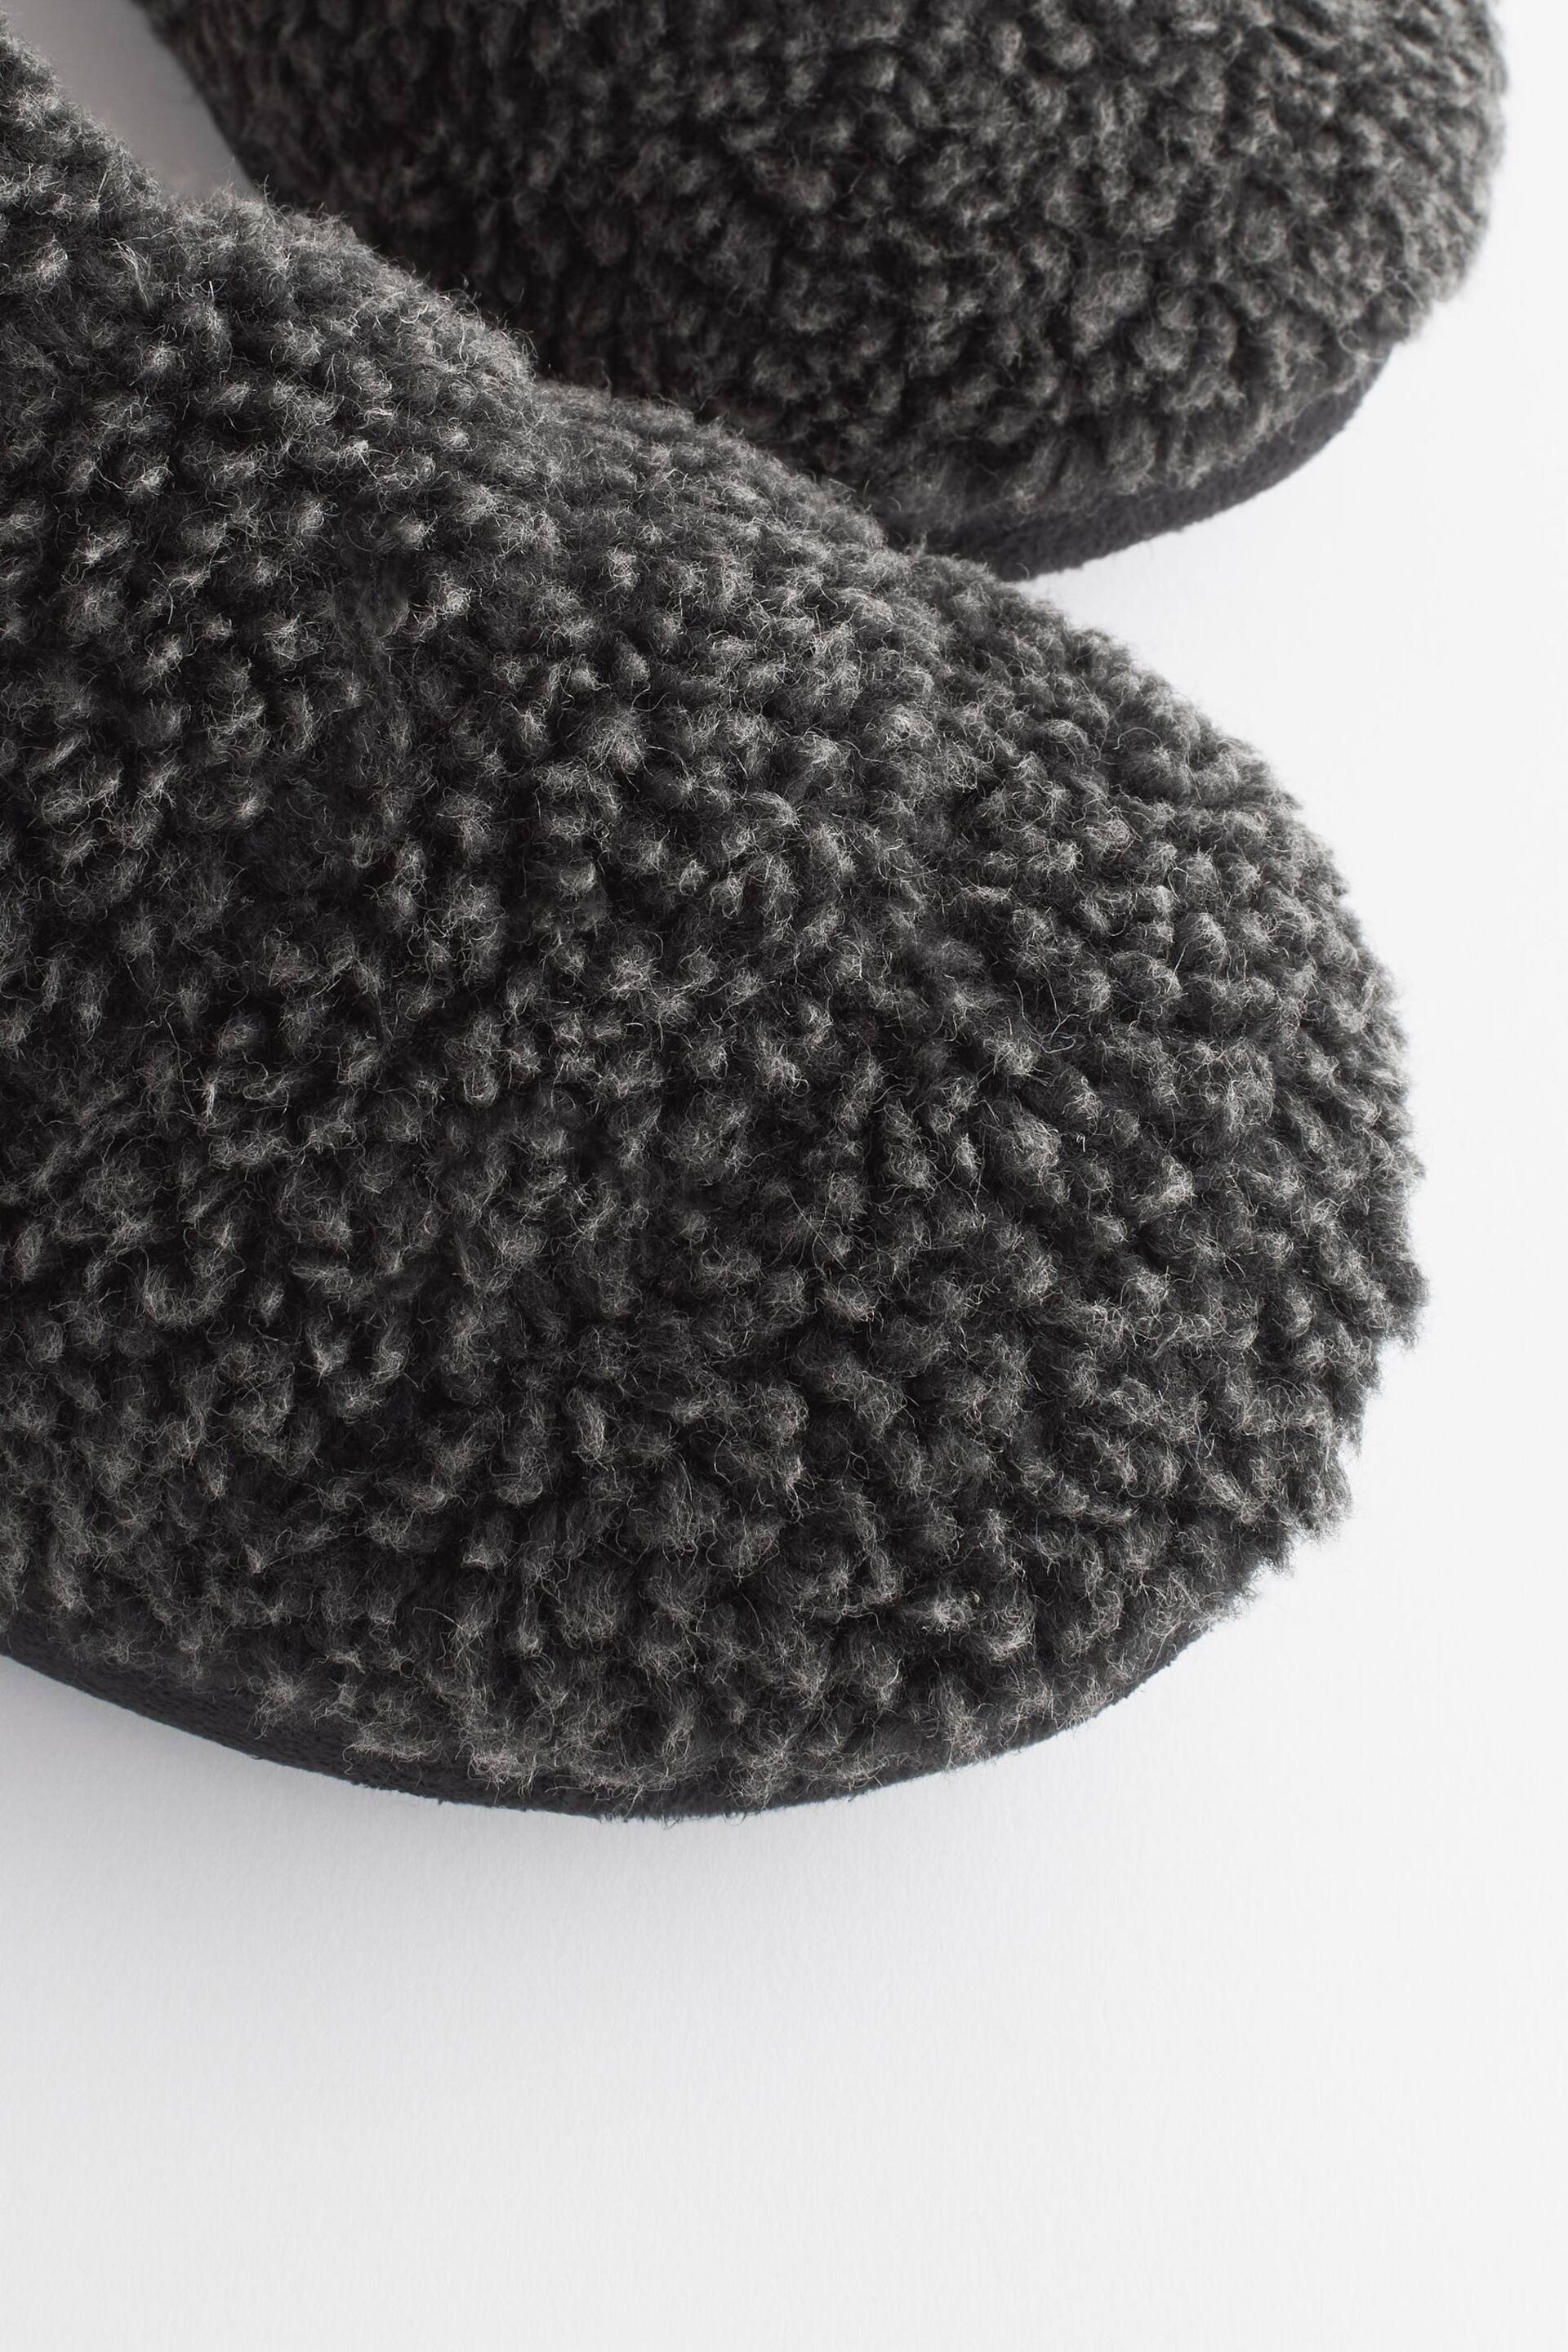 Charcoal Grey Padded Borg Mule Slippers - Image 5 of 7